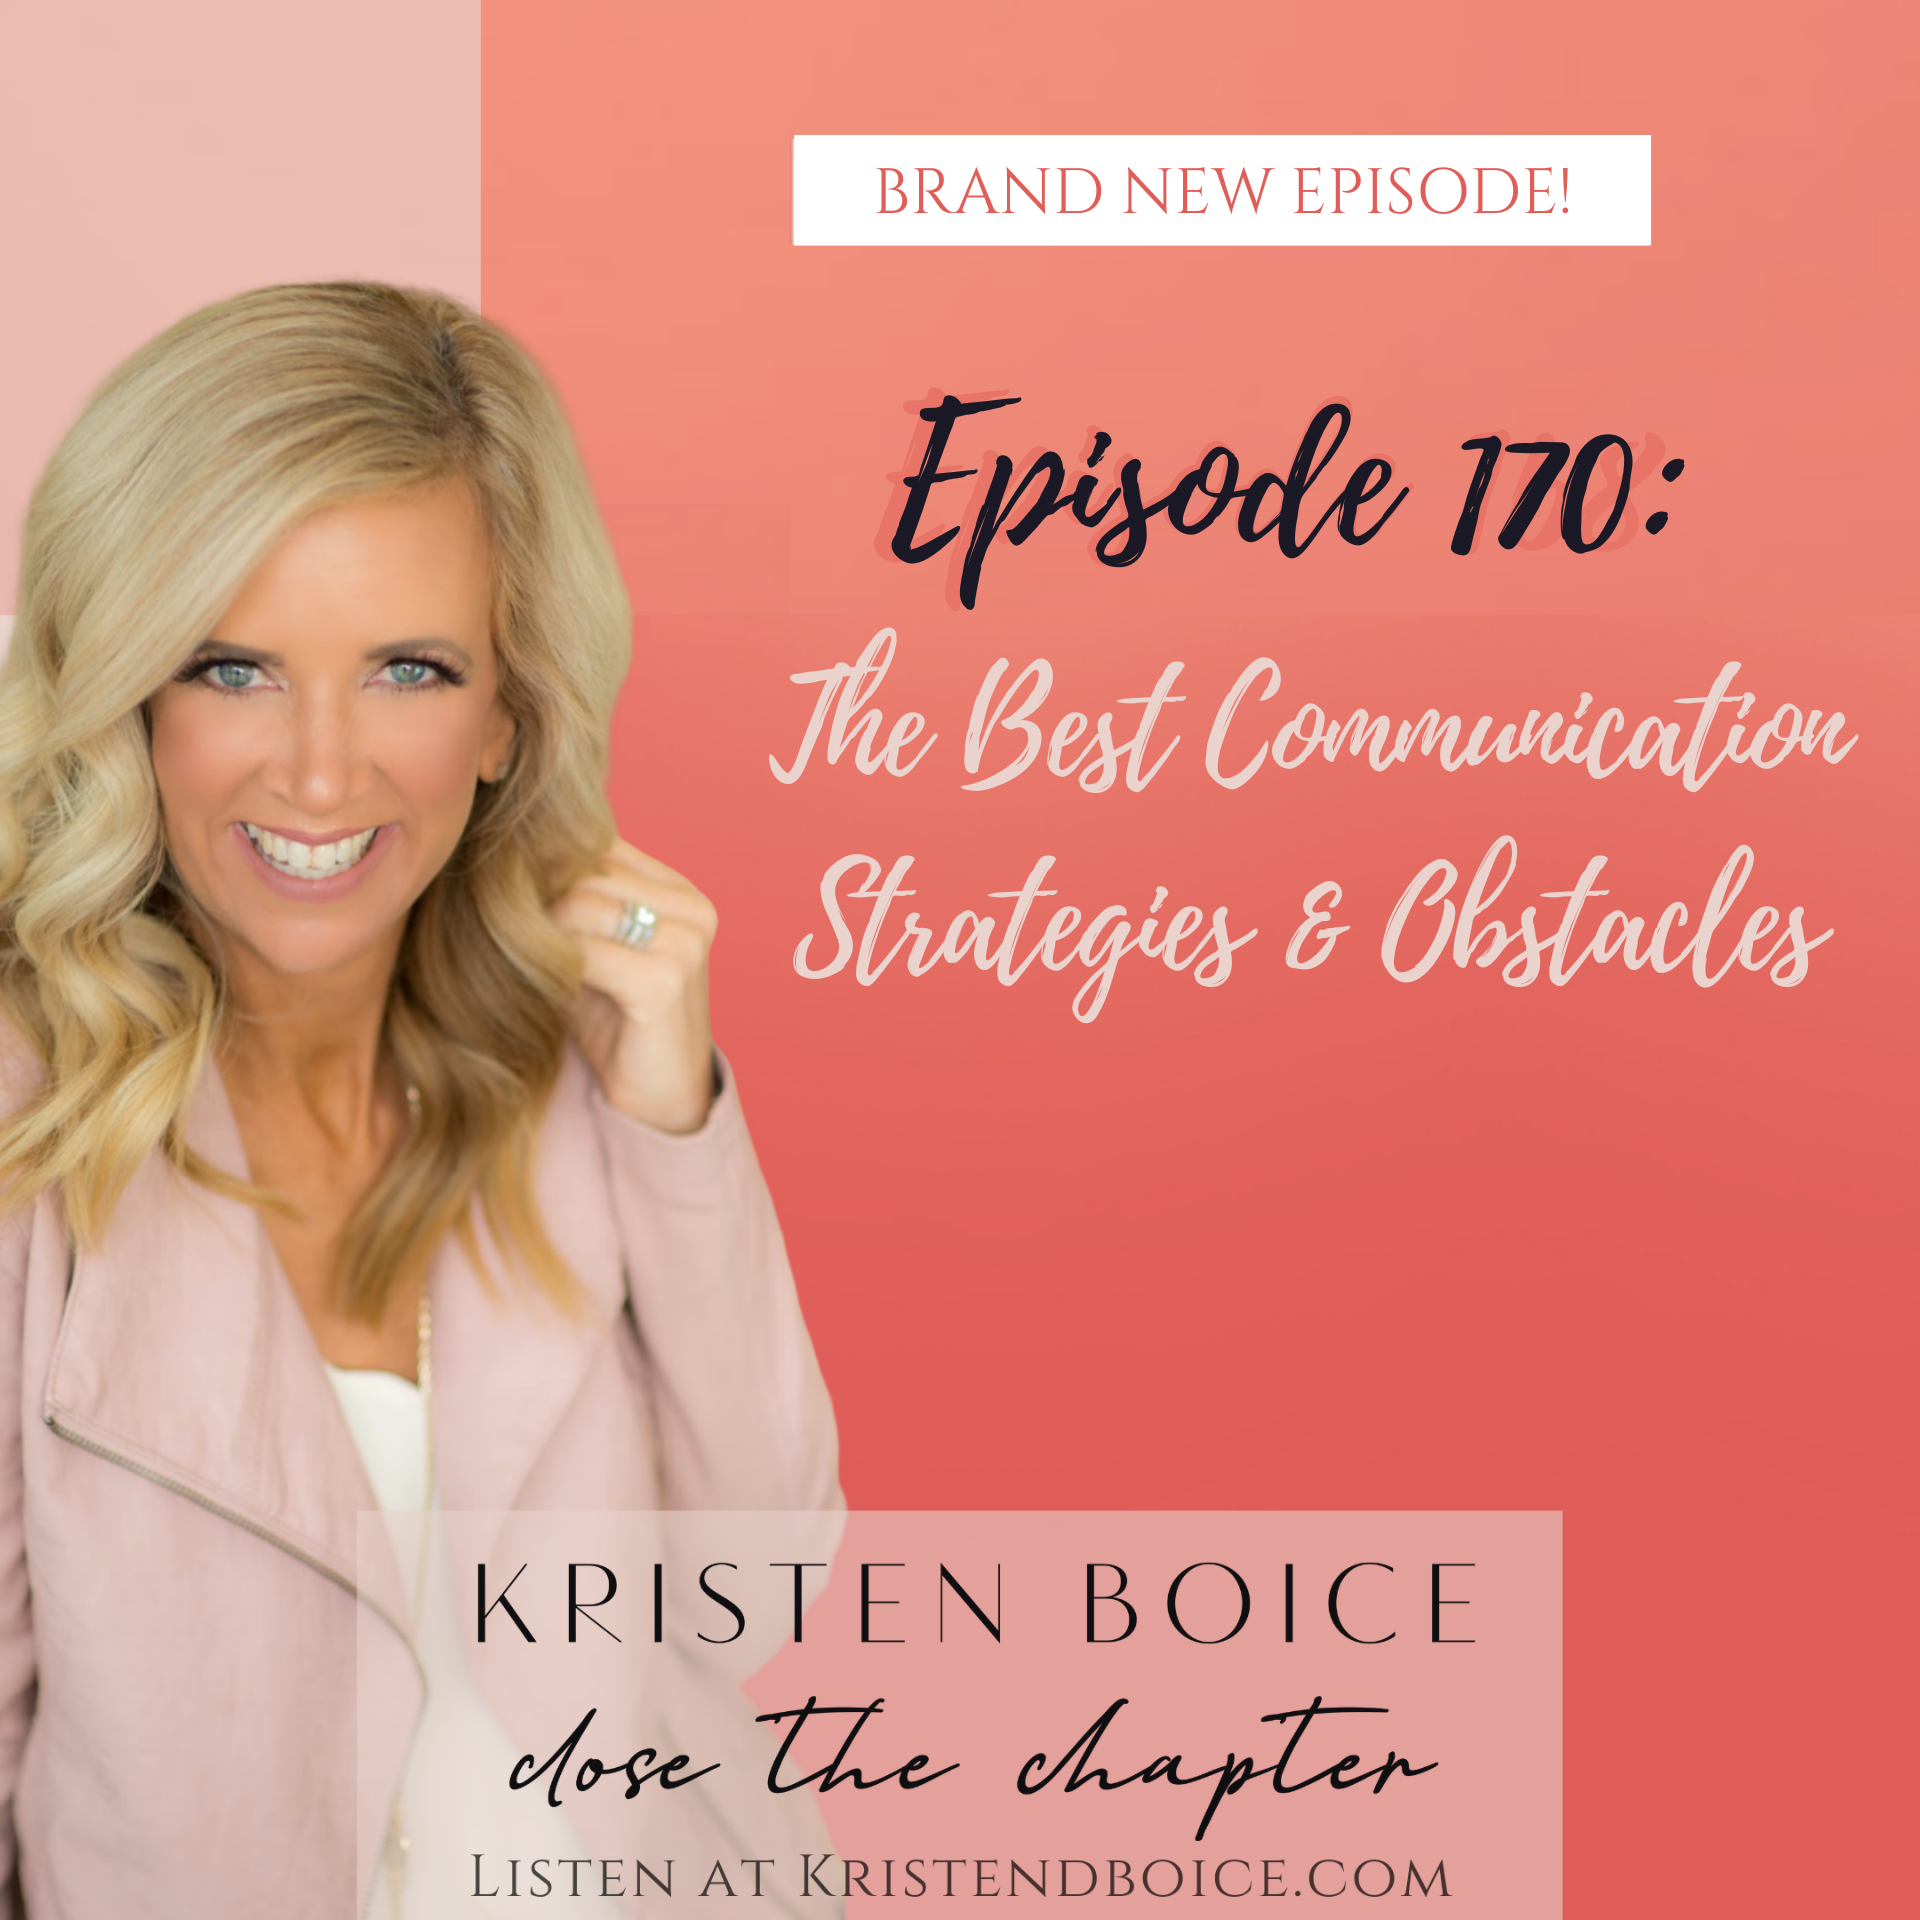 Episode 170 The Best Communication Strategies & Obstacles